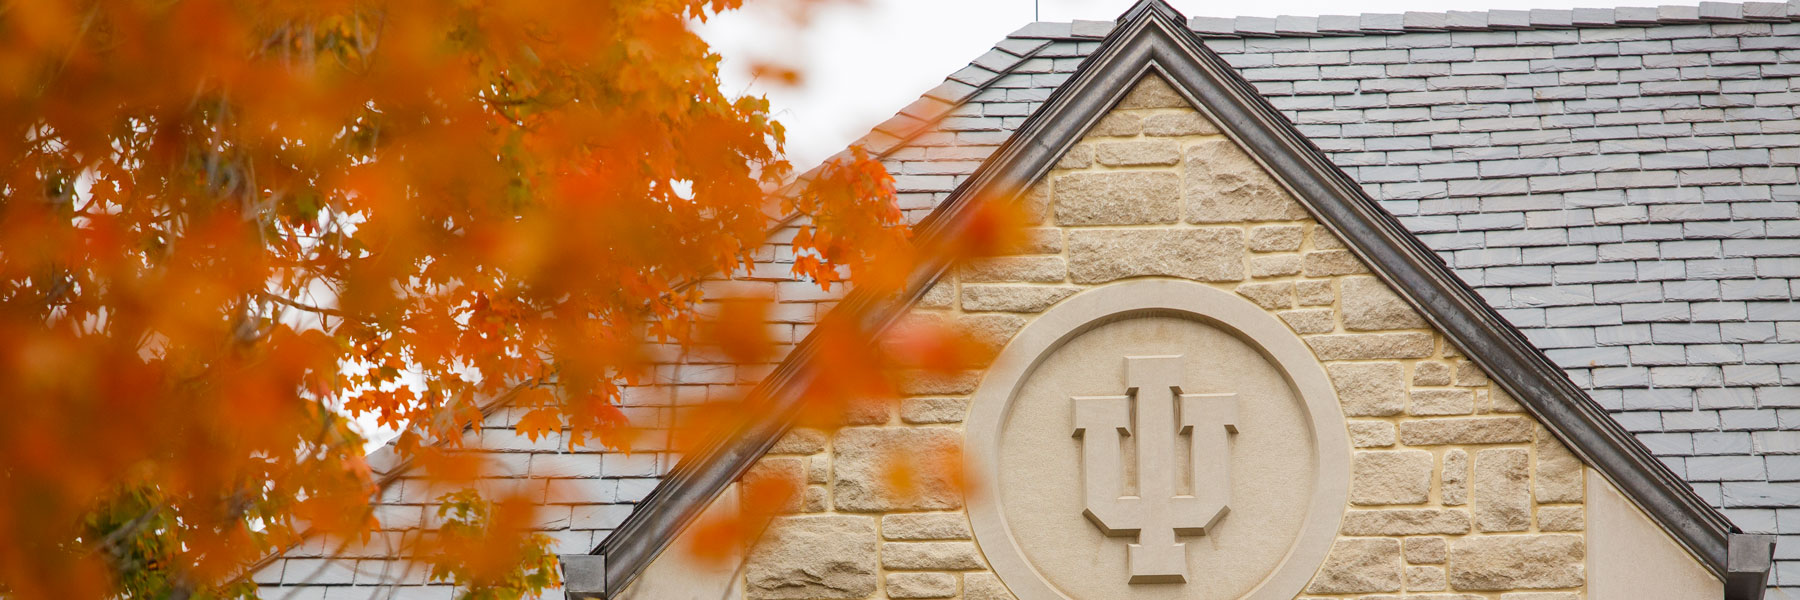 The IU trident on a campus building surrounded by Fall leaves